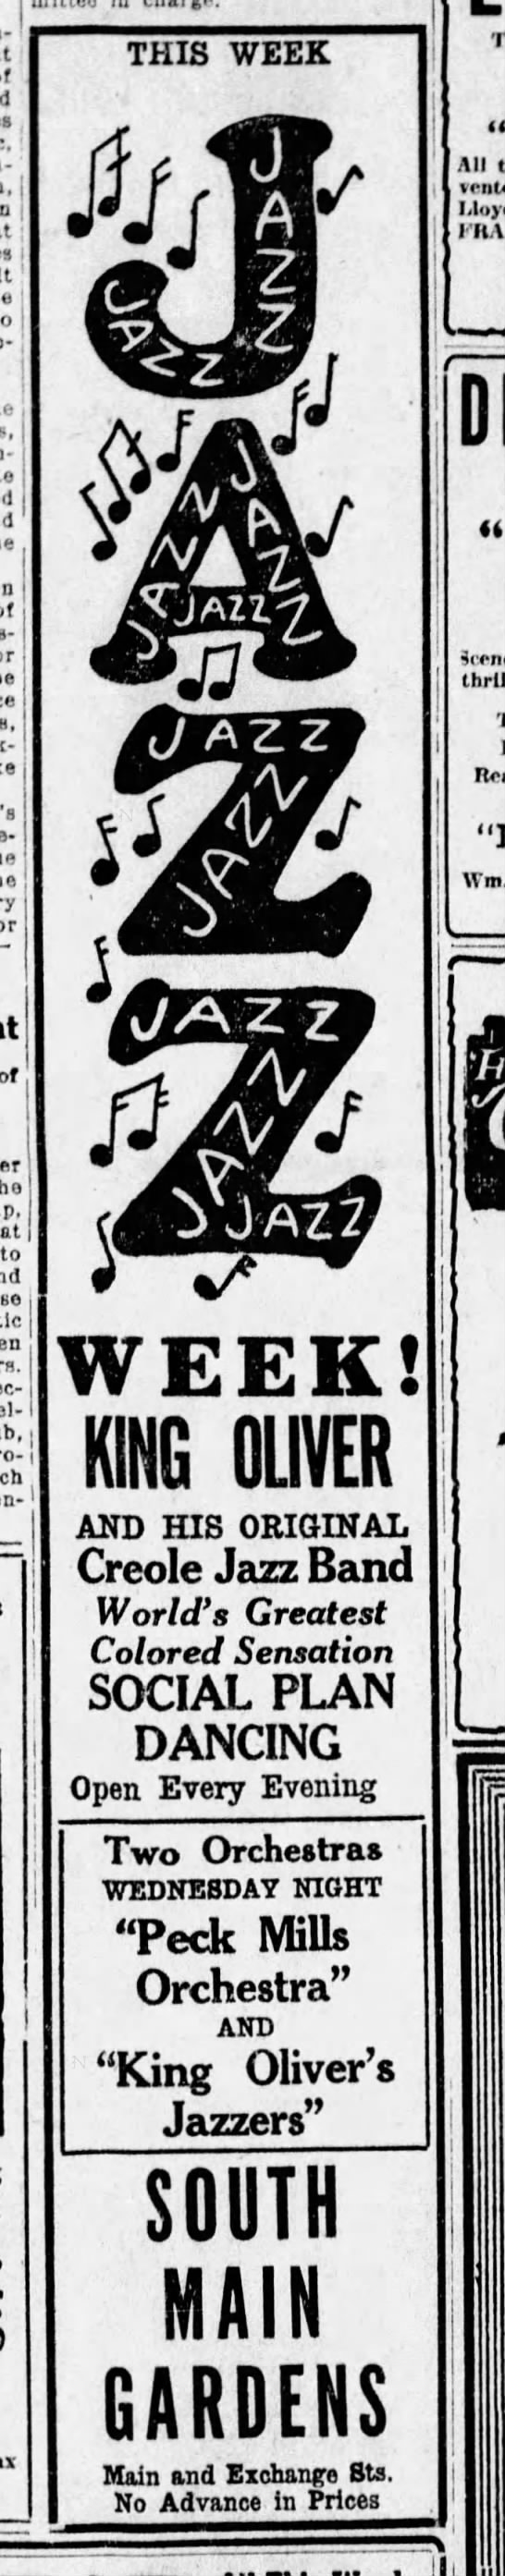 1924 ad for King Oliver and the Original Creole Jazz Band - 